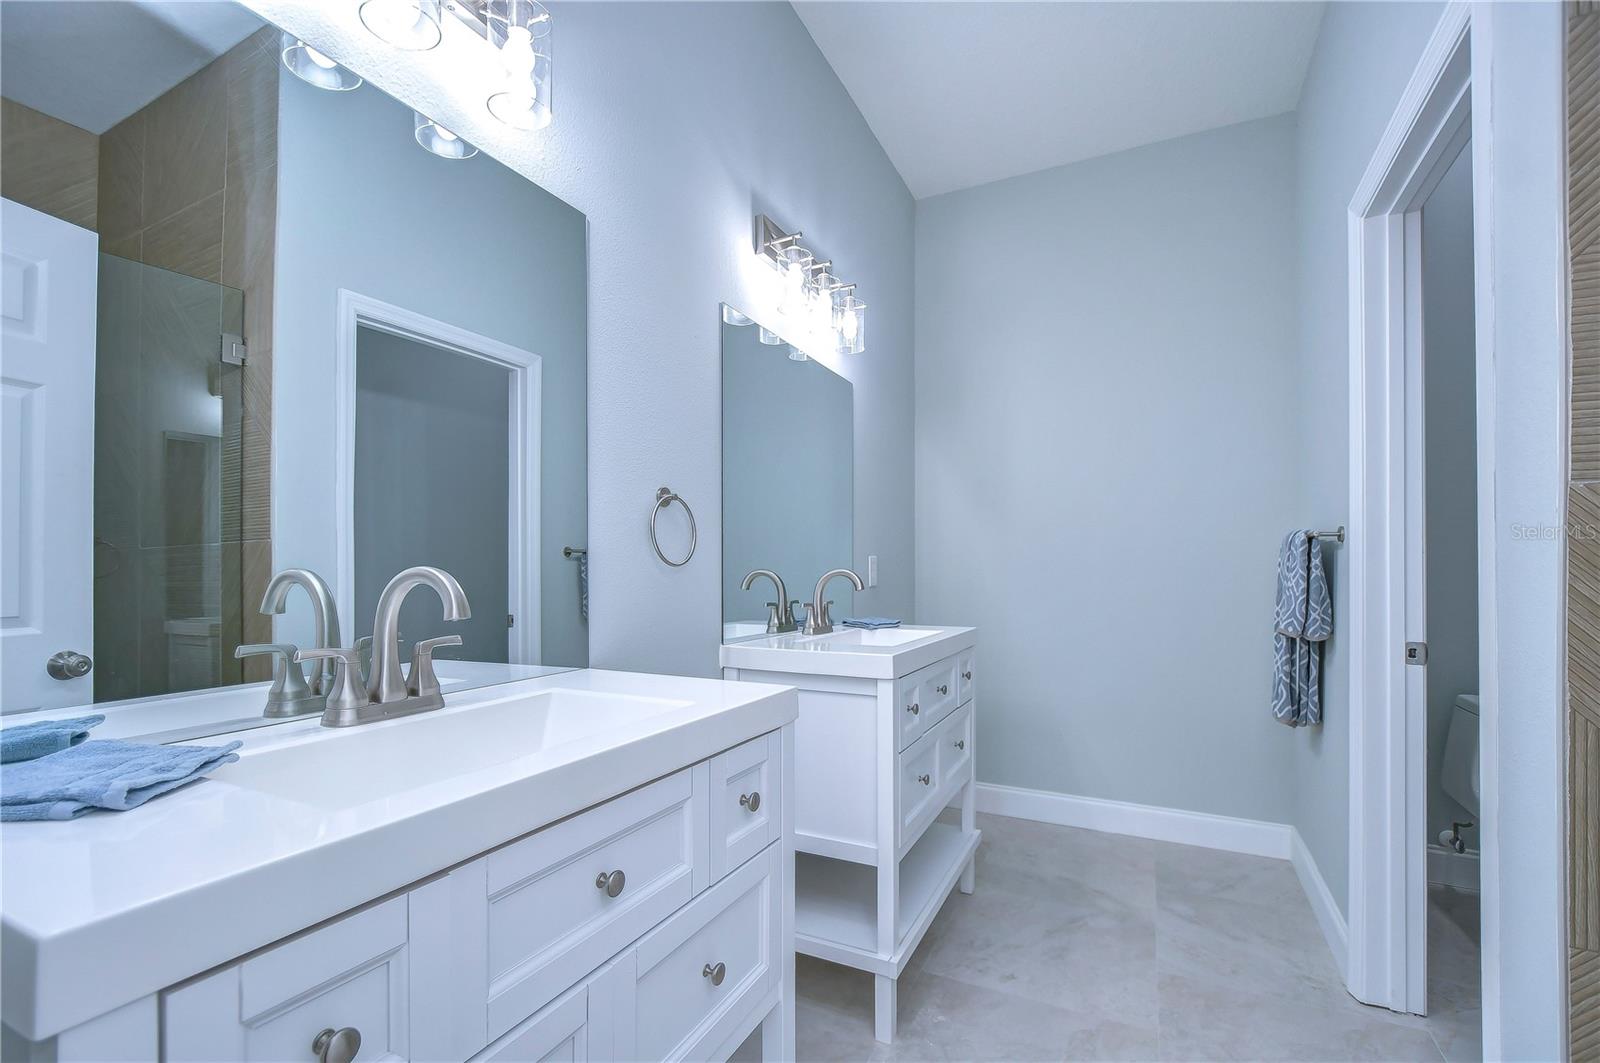 Separate Vanities in the master bathroom makes getting ready for work or date night a snap!